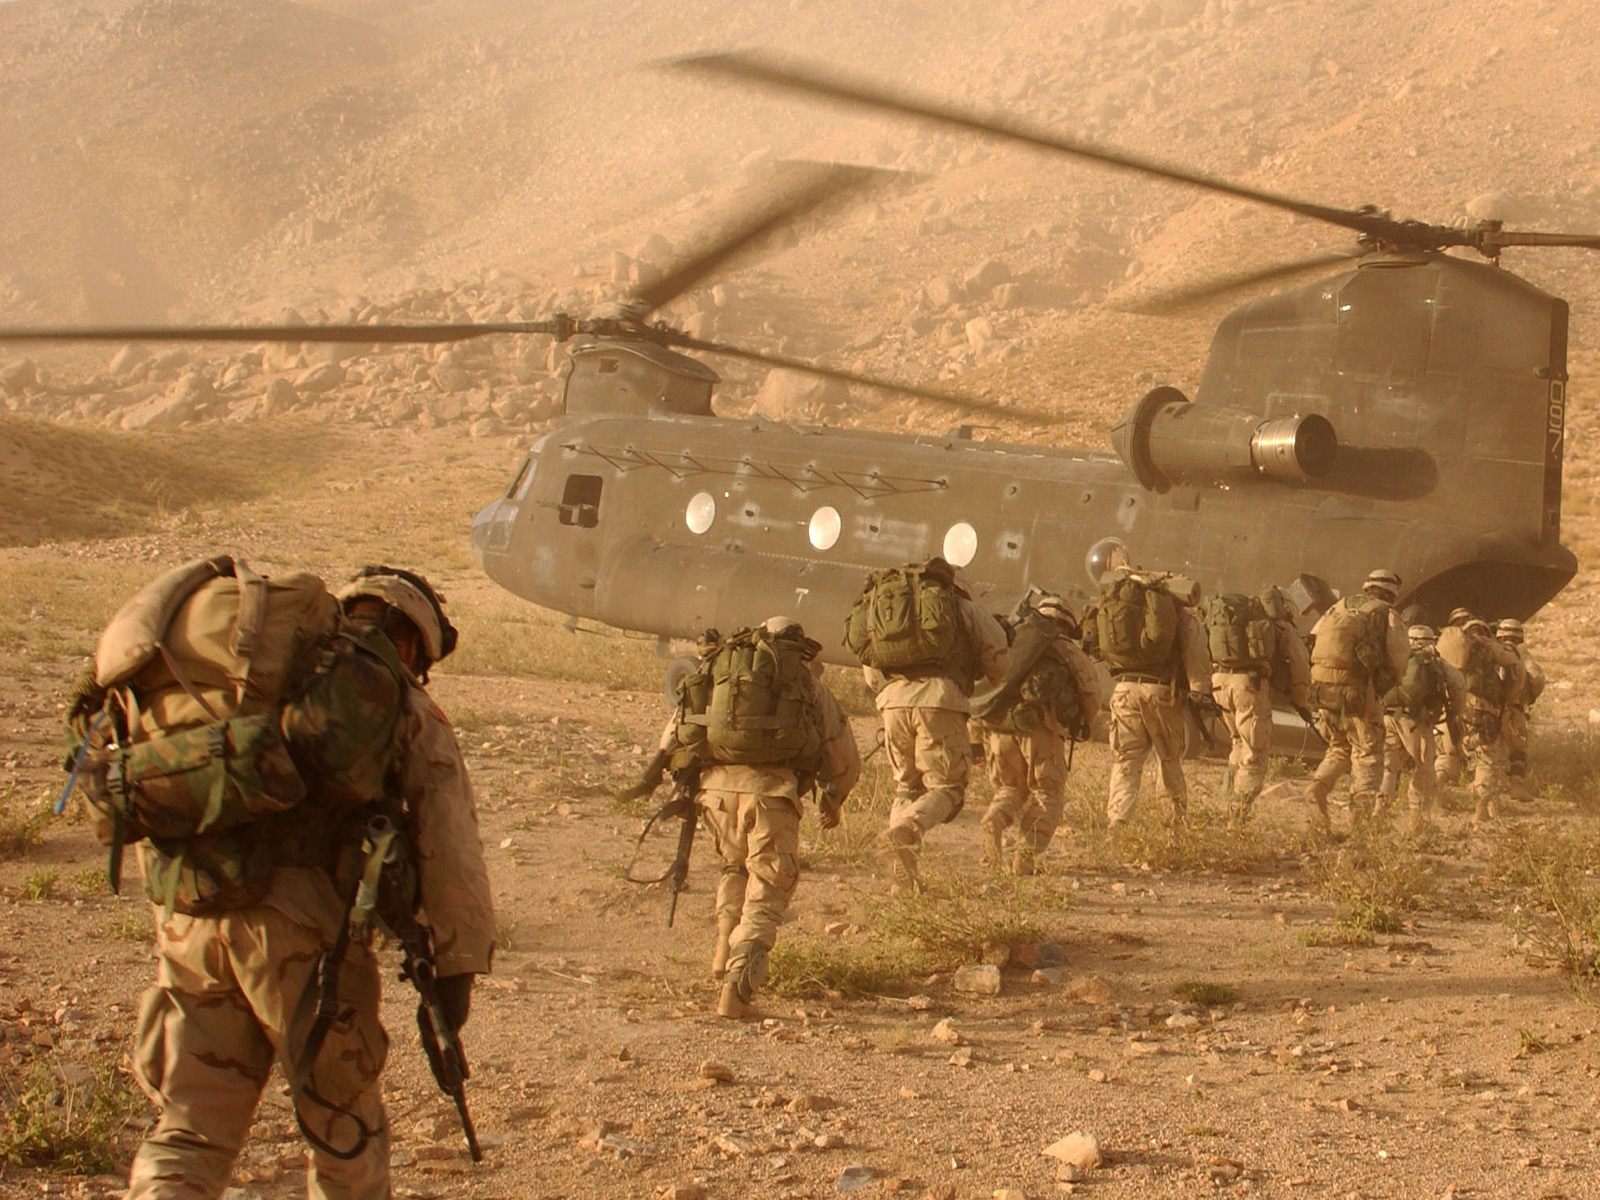 CH 47 Chinook Helicopter Daychopan Province Afghanistan